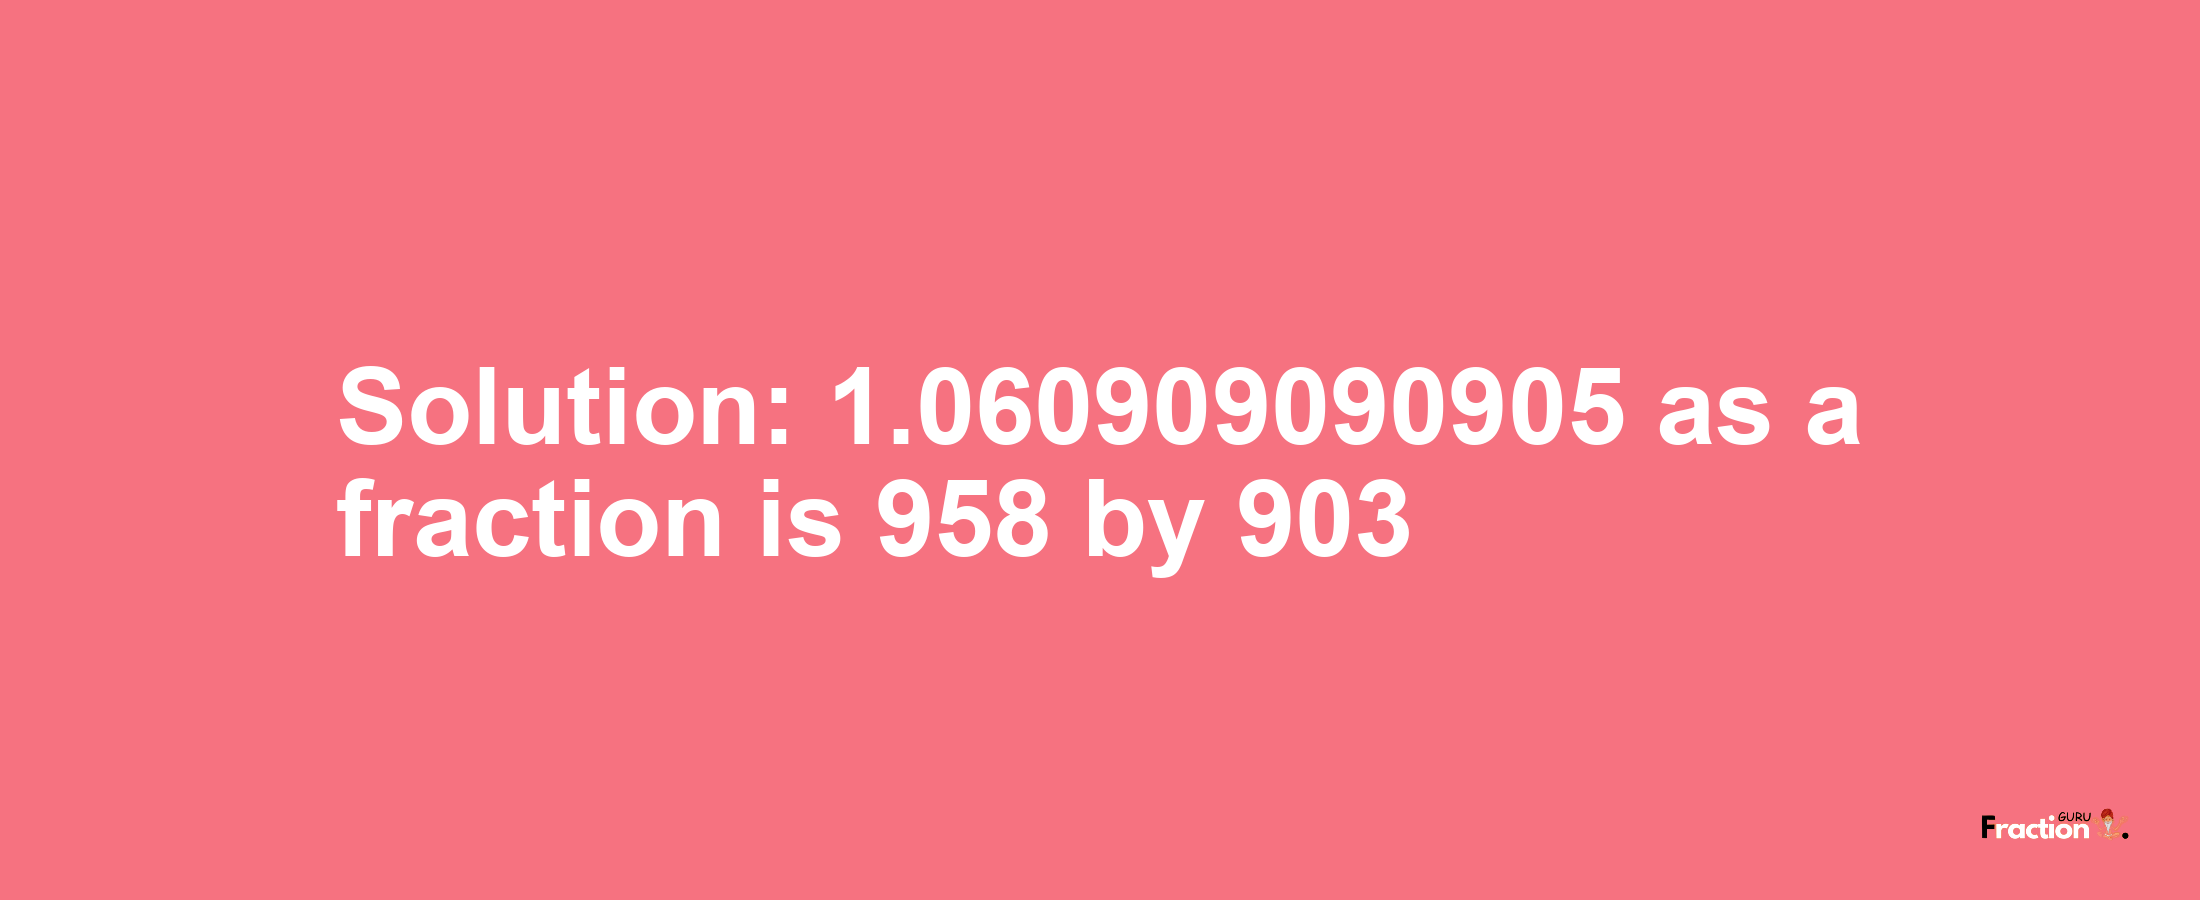 Solution:1.060909090905 as a fraction is 958/903